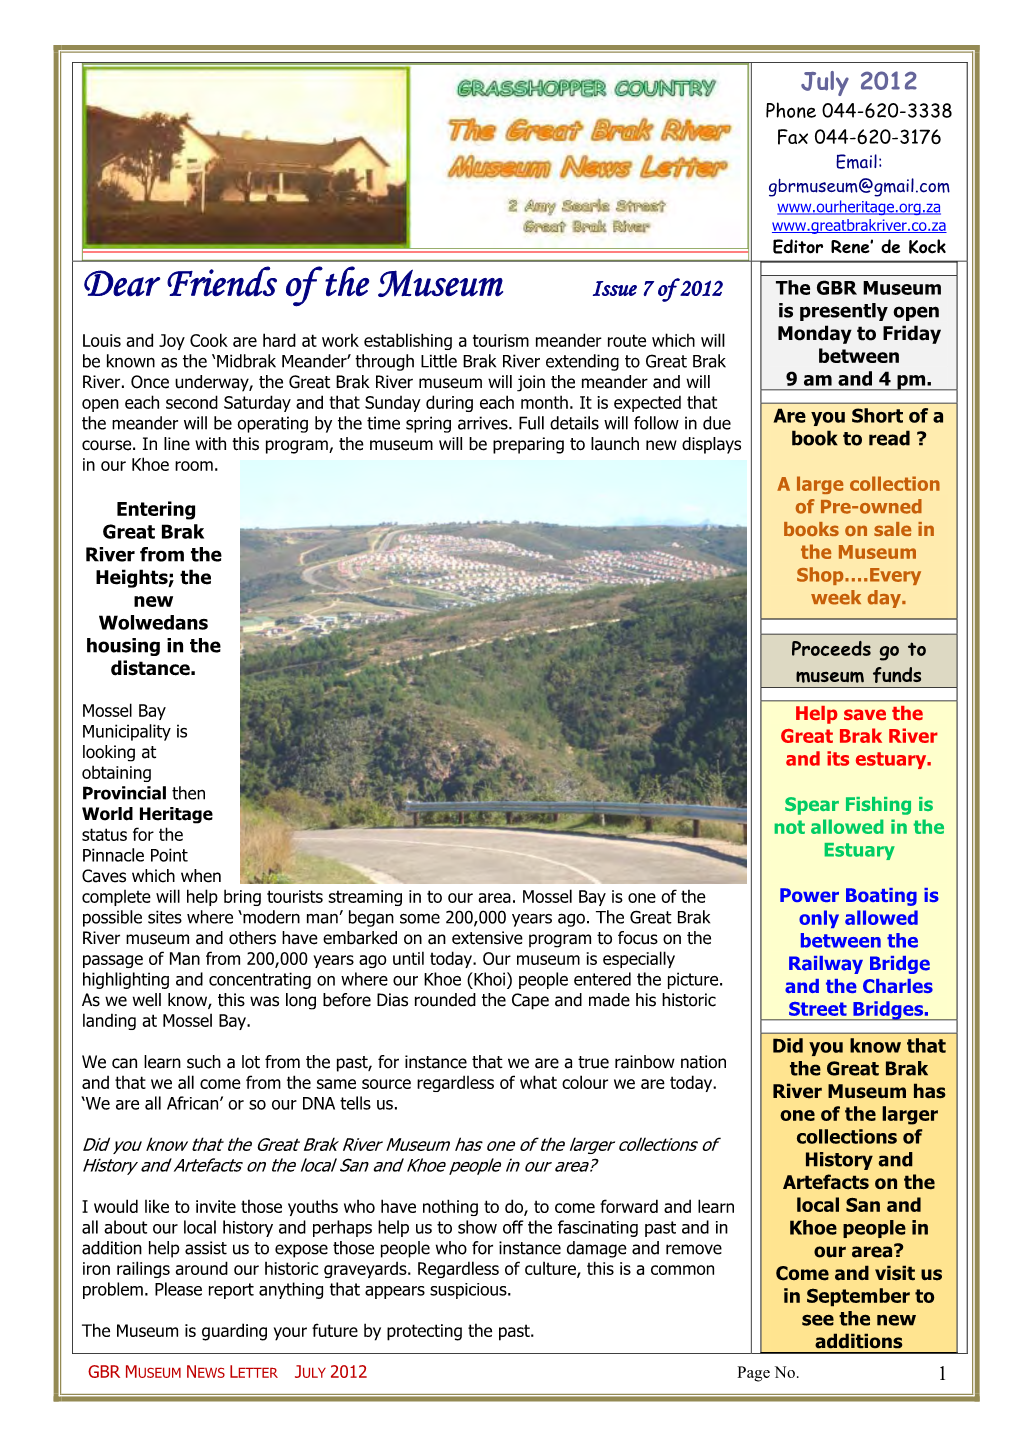 Dear Friends of the Museum Issue 7 of 2012